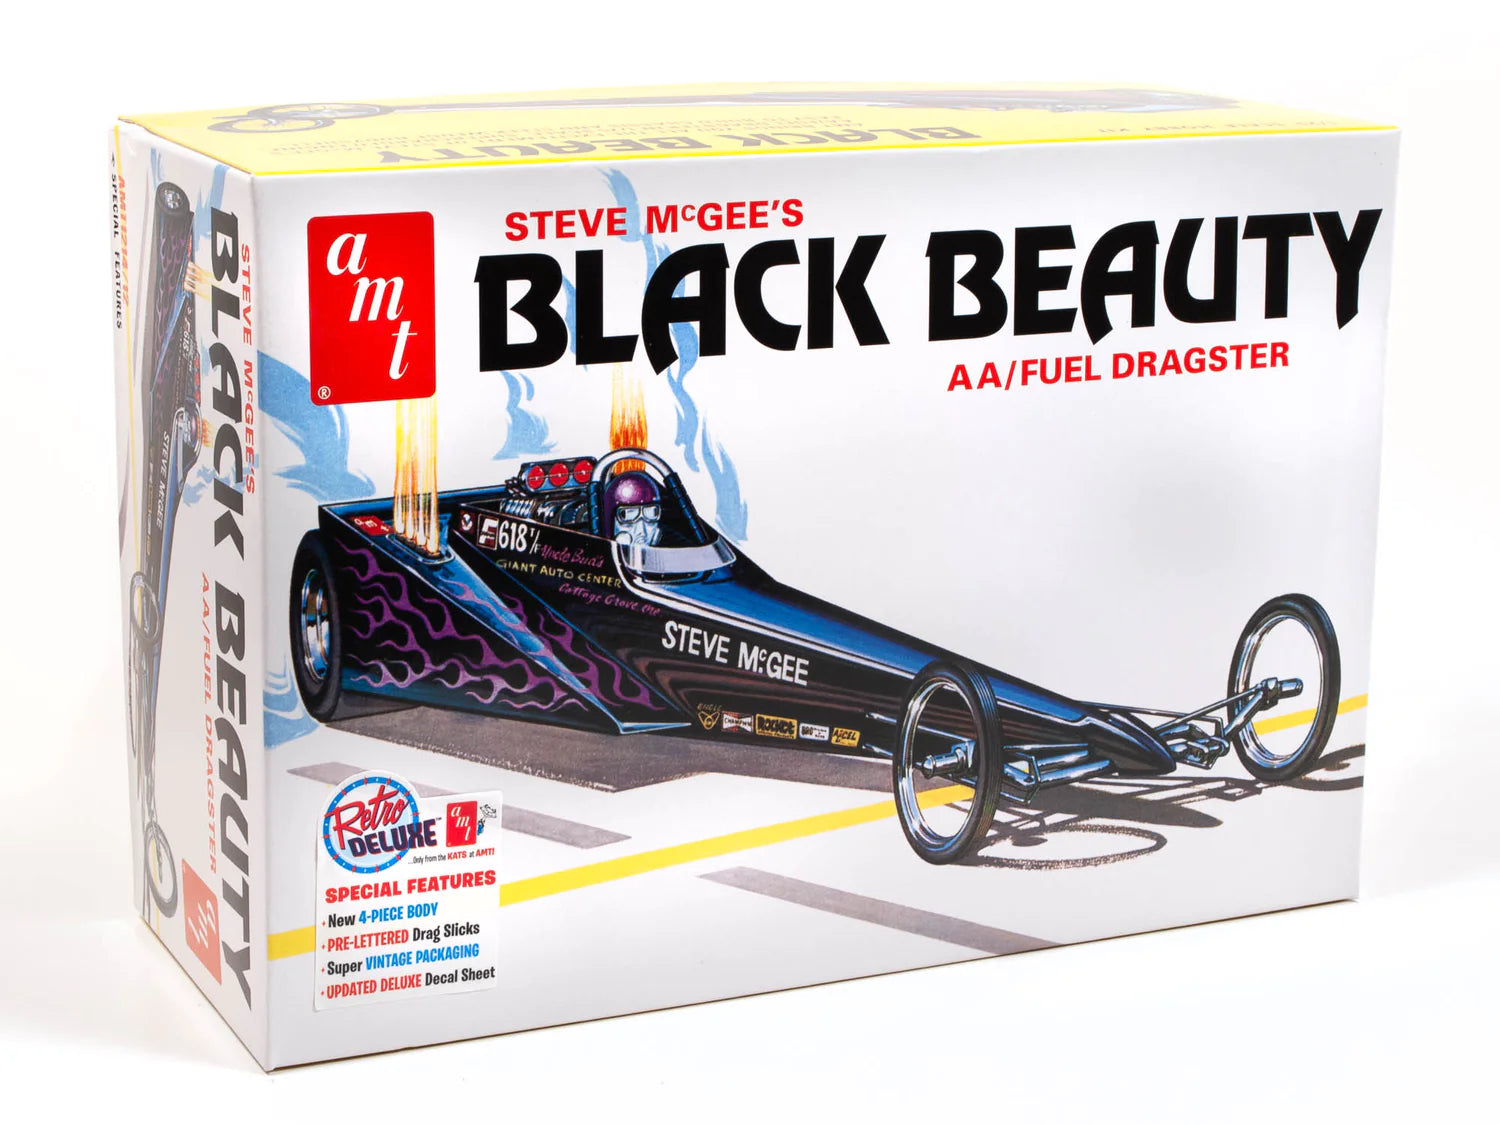 AMT1214 - 1:25 Steve McGee Black Beauty Wedge Dragster